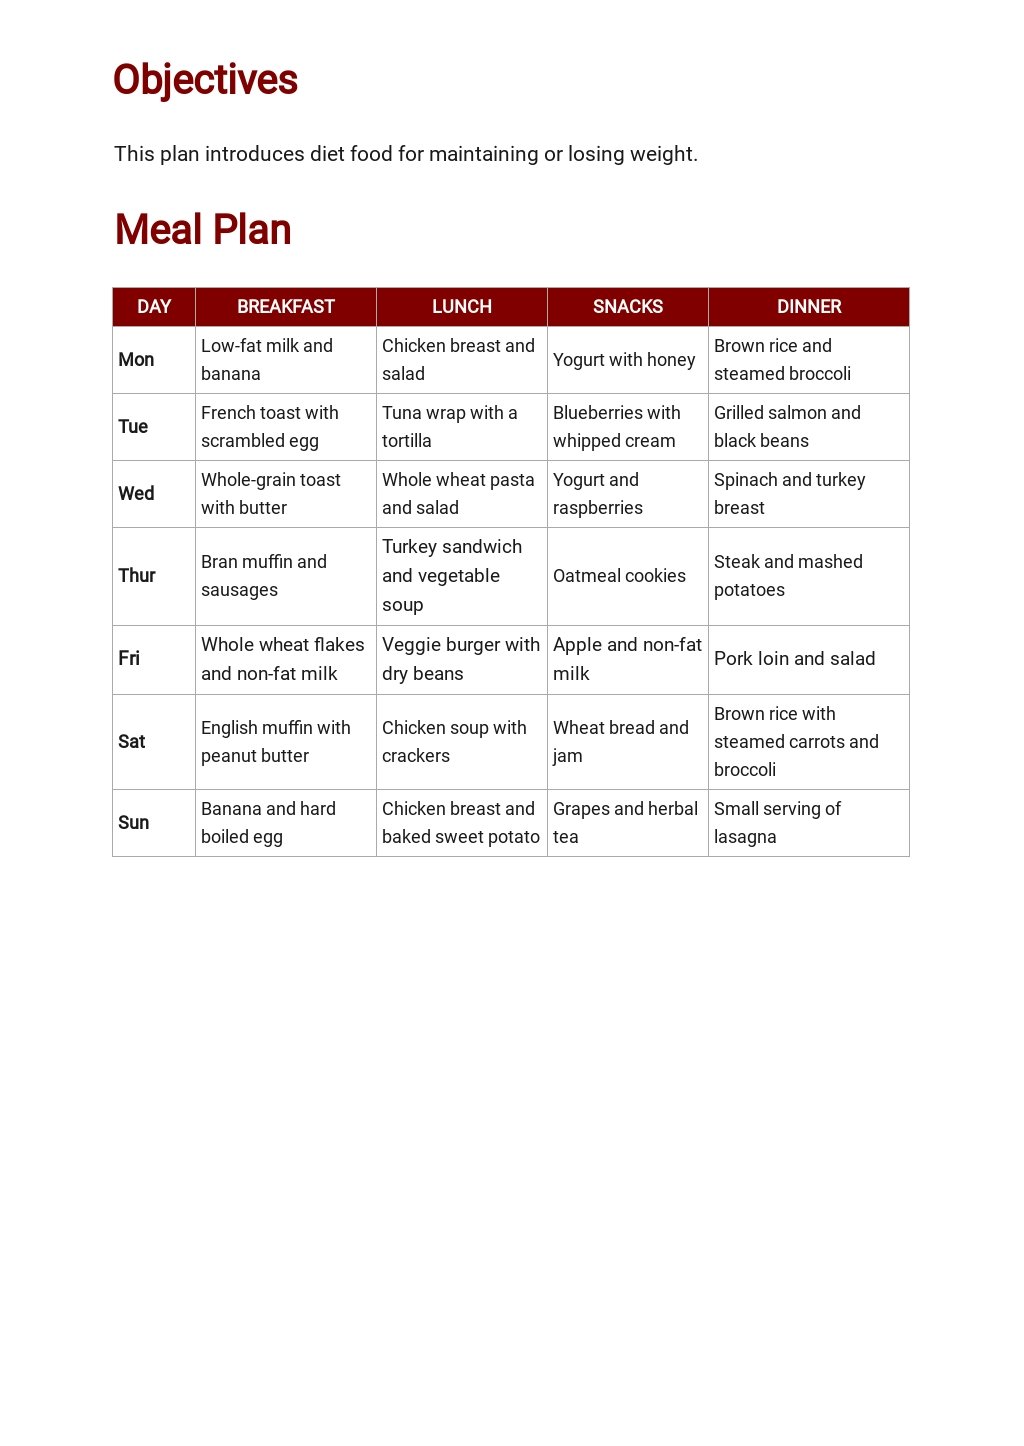 Diet Meal Plan Template in Google Docs, Word, Apple Pages, PDF